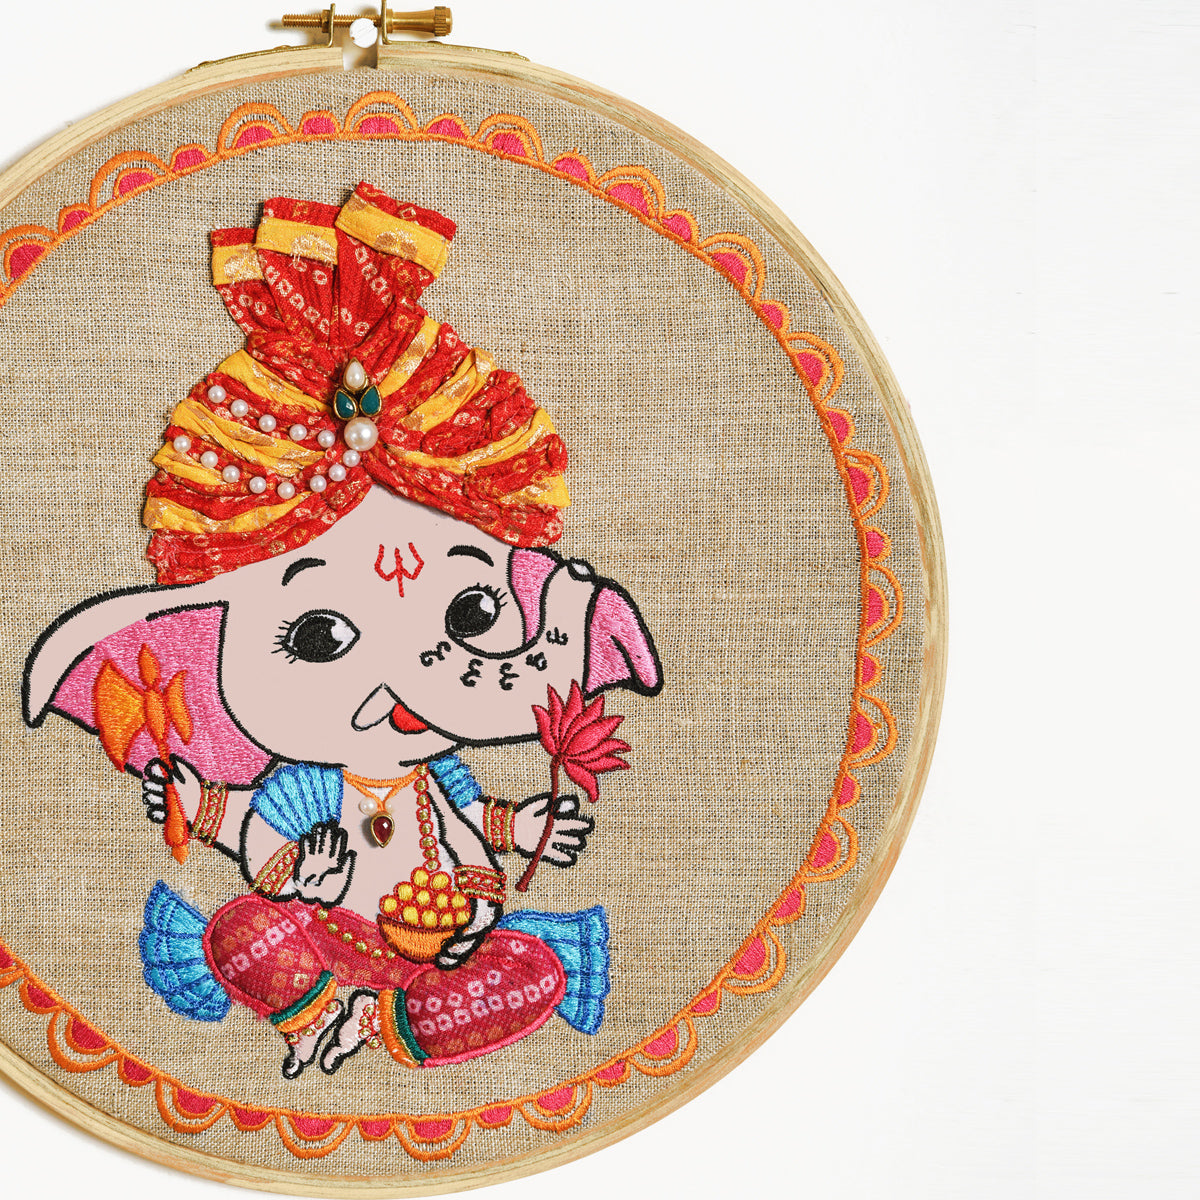 BABY GANESHA WALL ART - Embroidery & appliqued on Hoop or wooden frame.